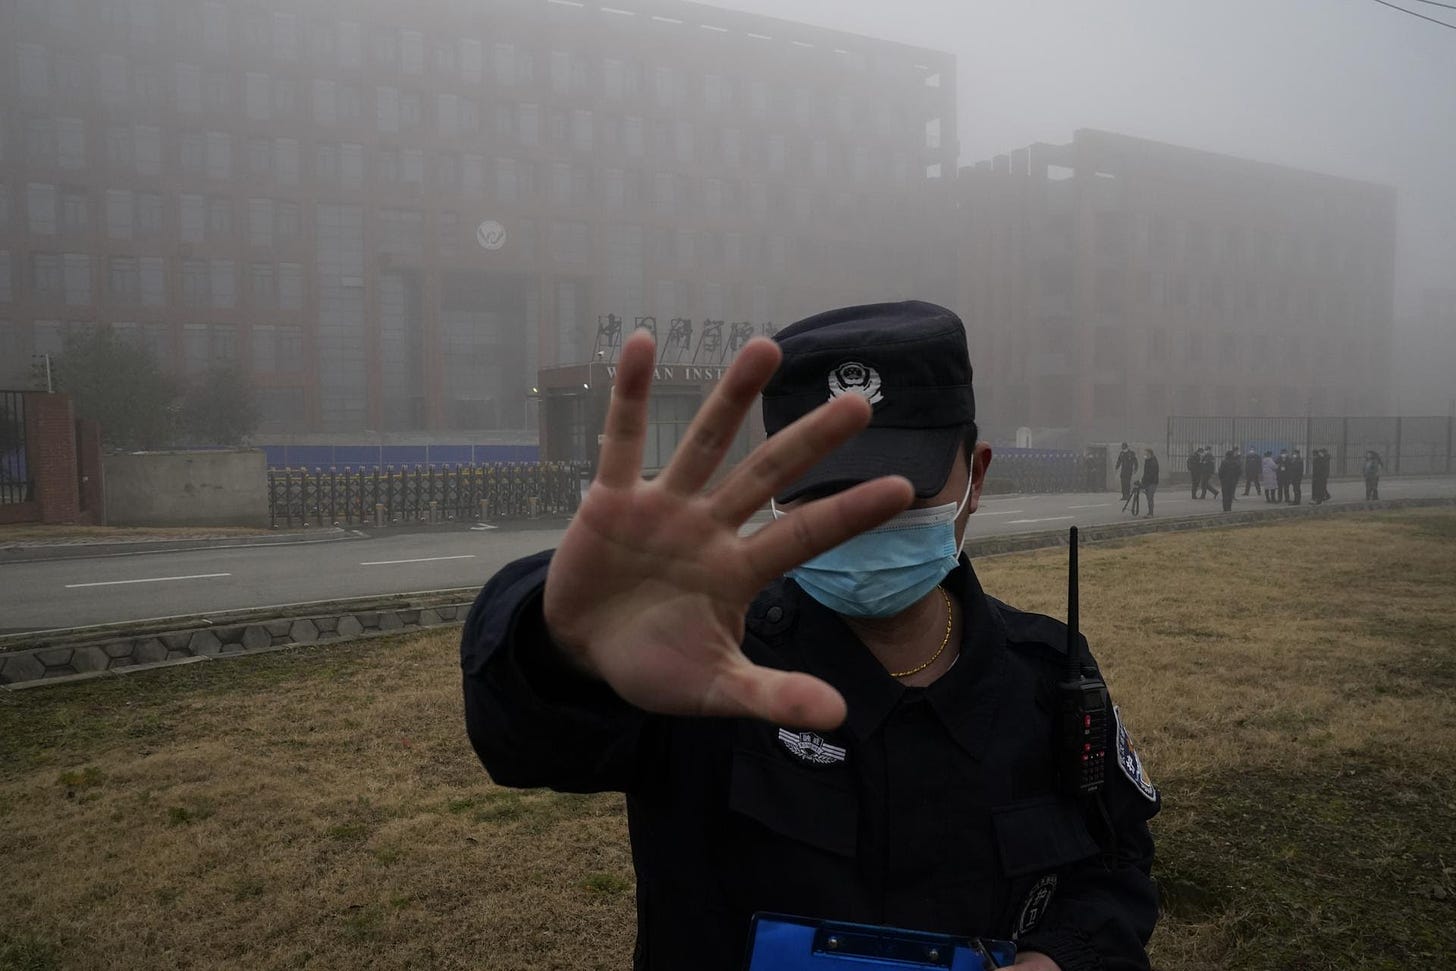 Security moves journalists away from the Wuhan Institute of Virology.